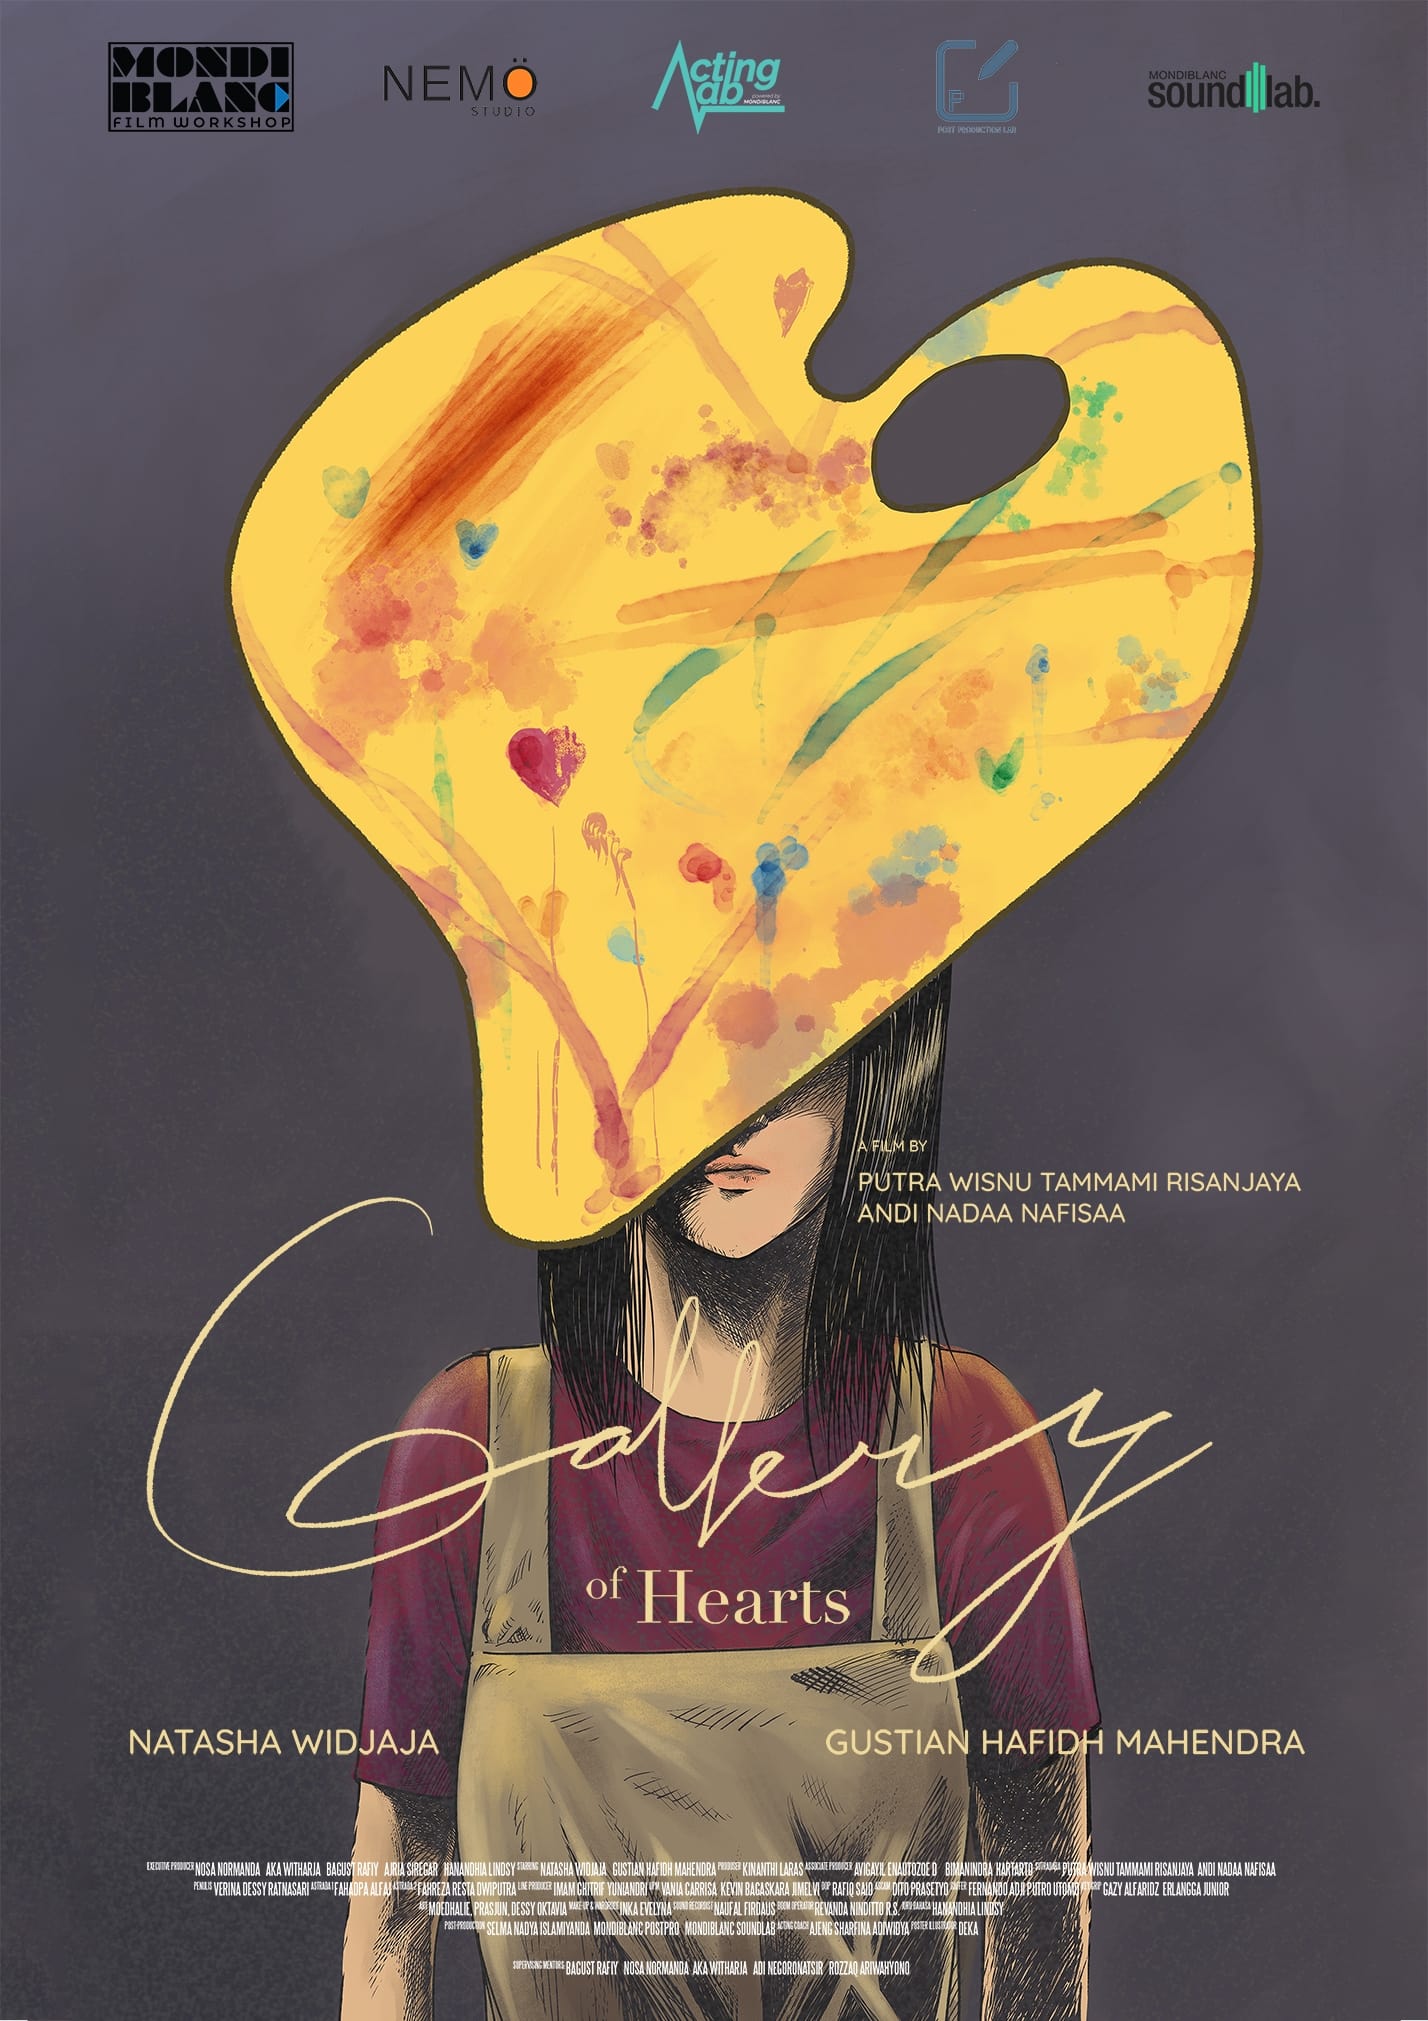 Gallery of Hearts